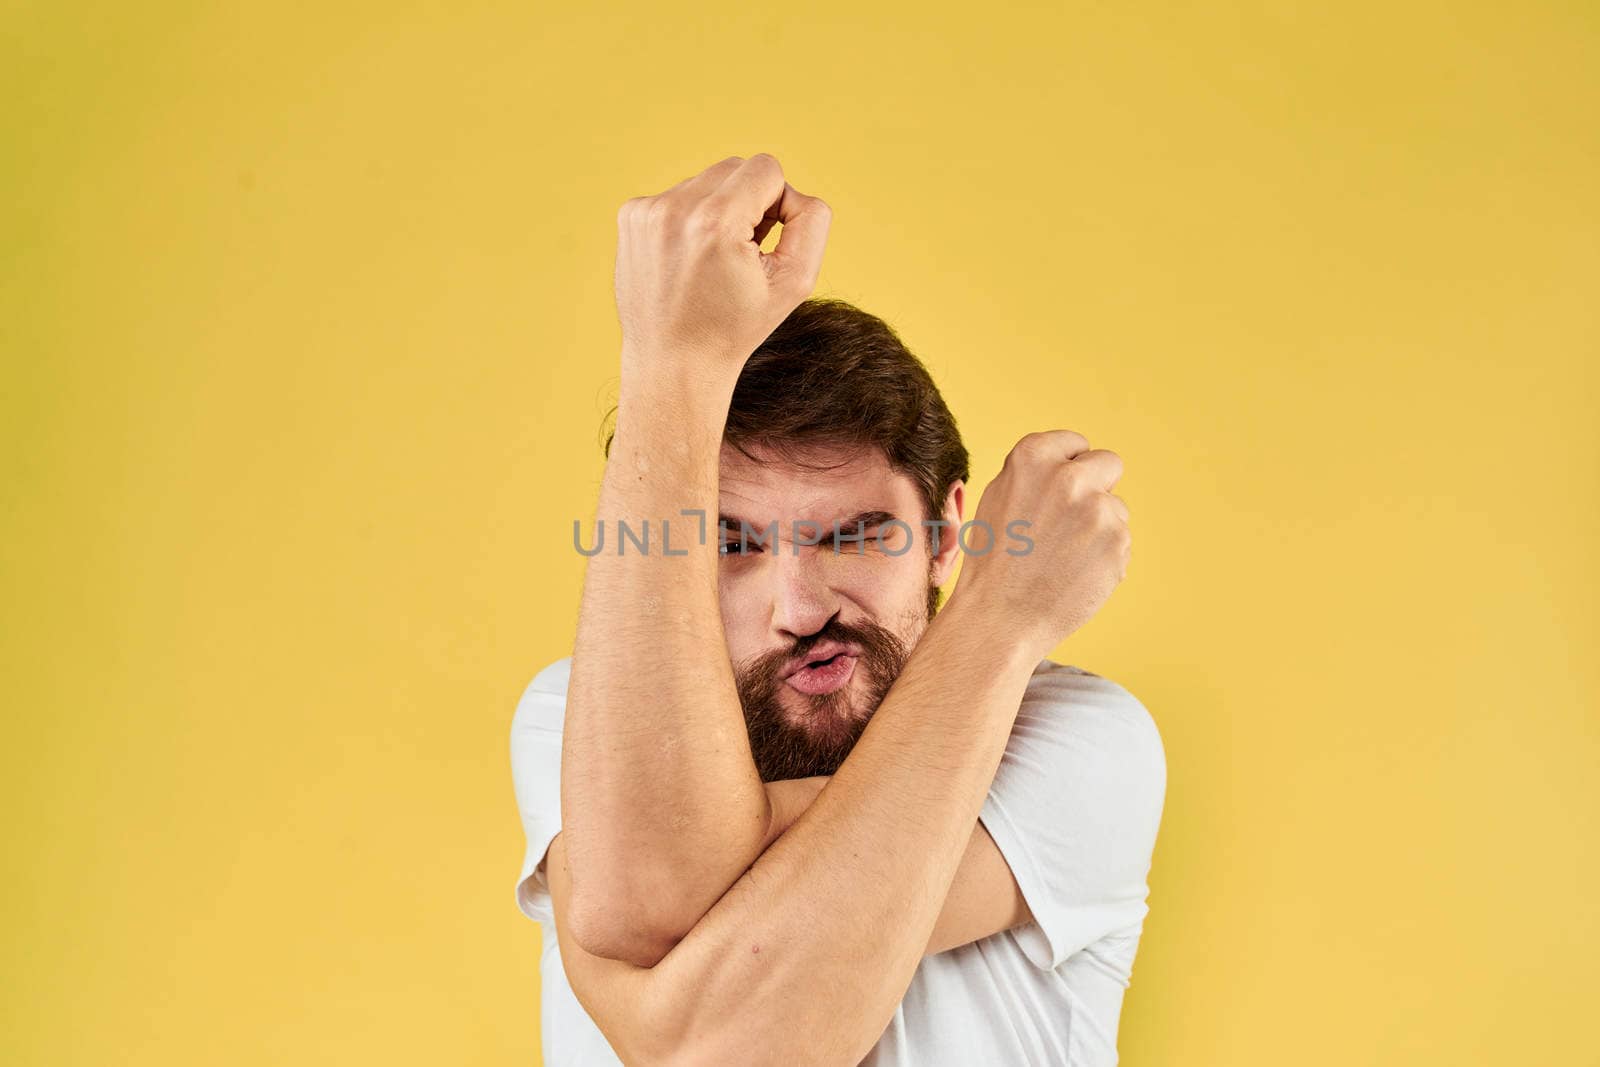 A man in a white t-shirt gestures with his hands lifestyle cropped view yellow background more fun by SHOTPRIME